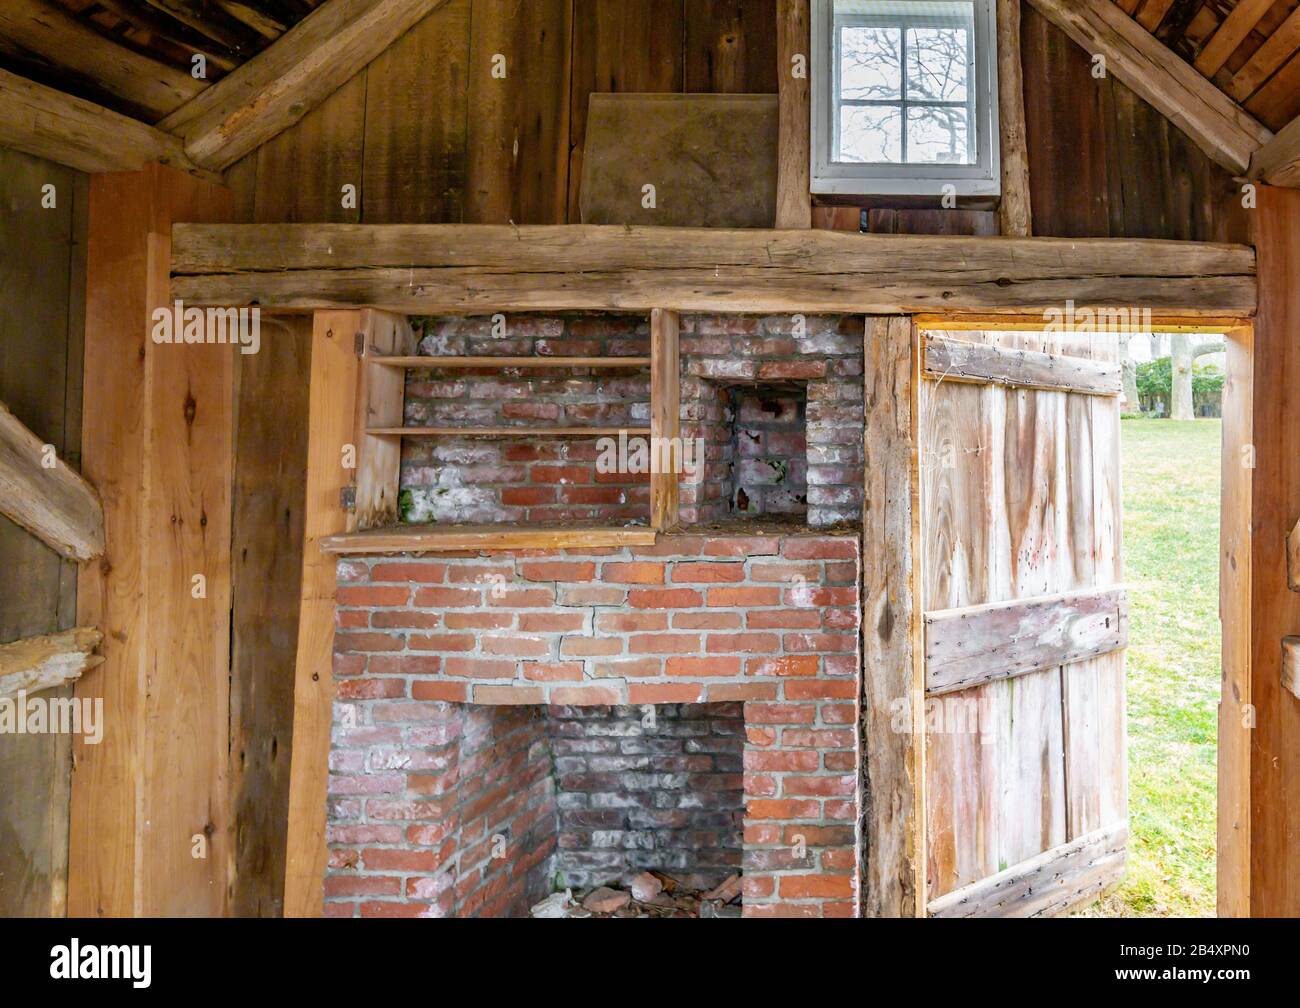 Interior image of an small one room house with a brick fireplace Stock Photo